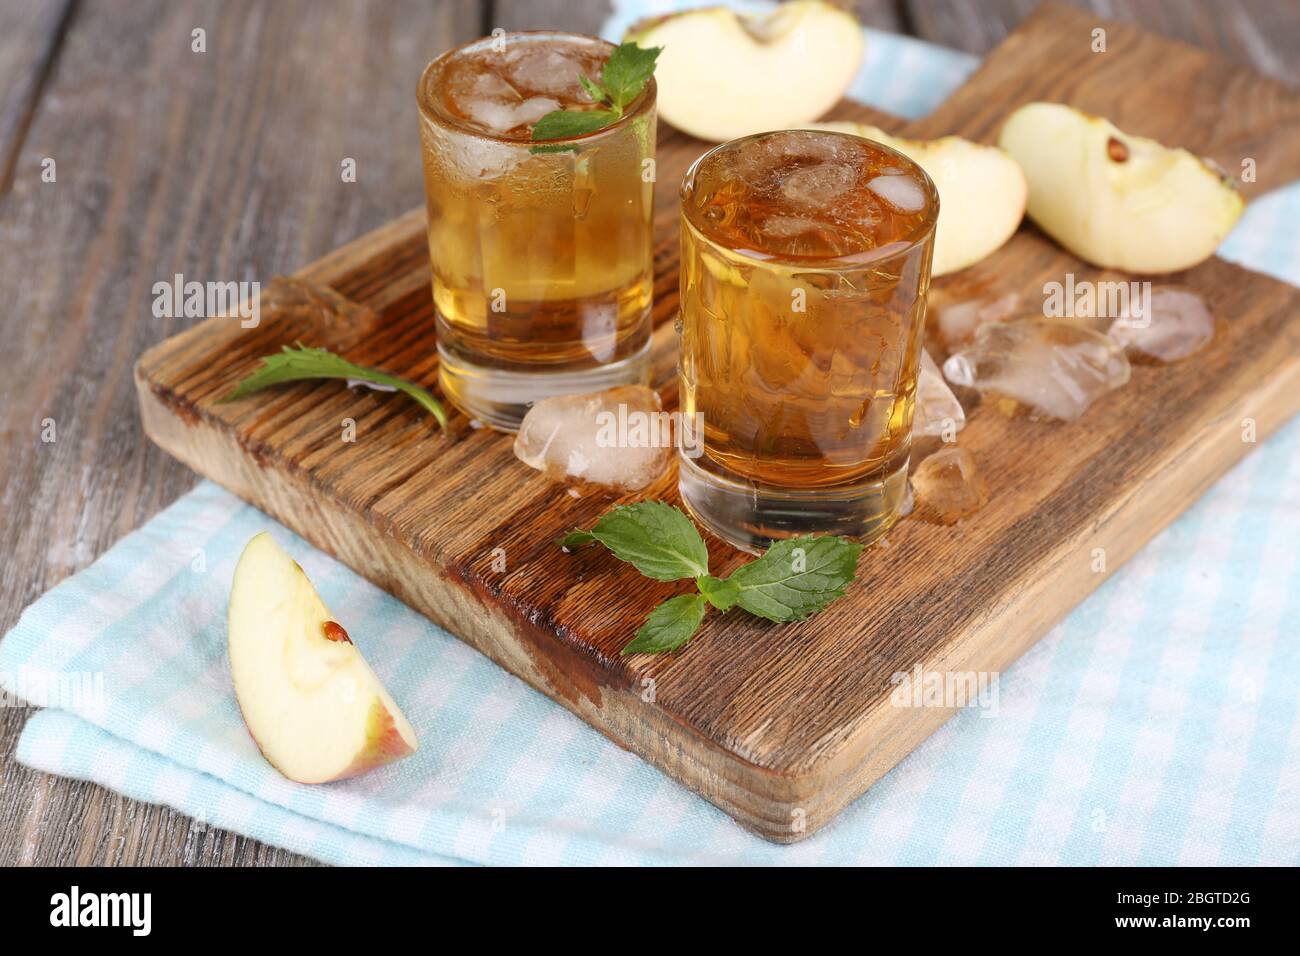 Still life with tasty apple cider in barrel and fresh apples Stock Photo